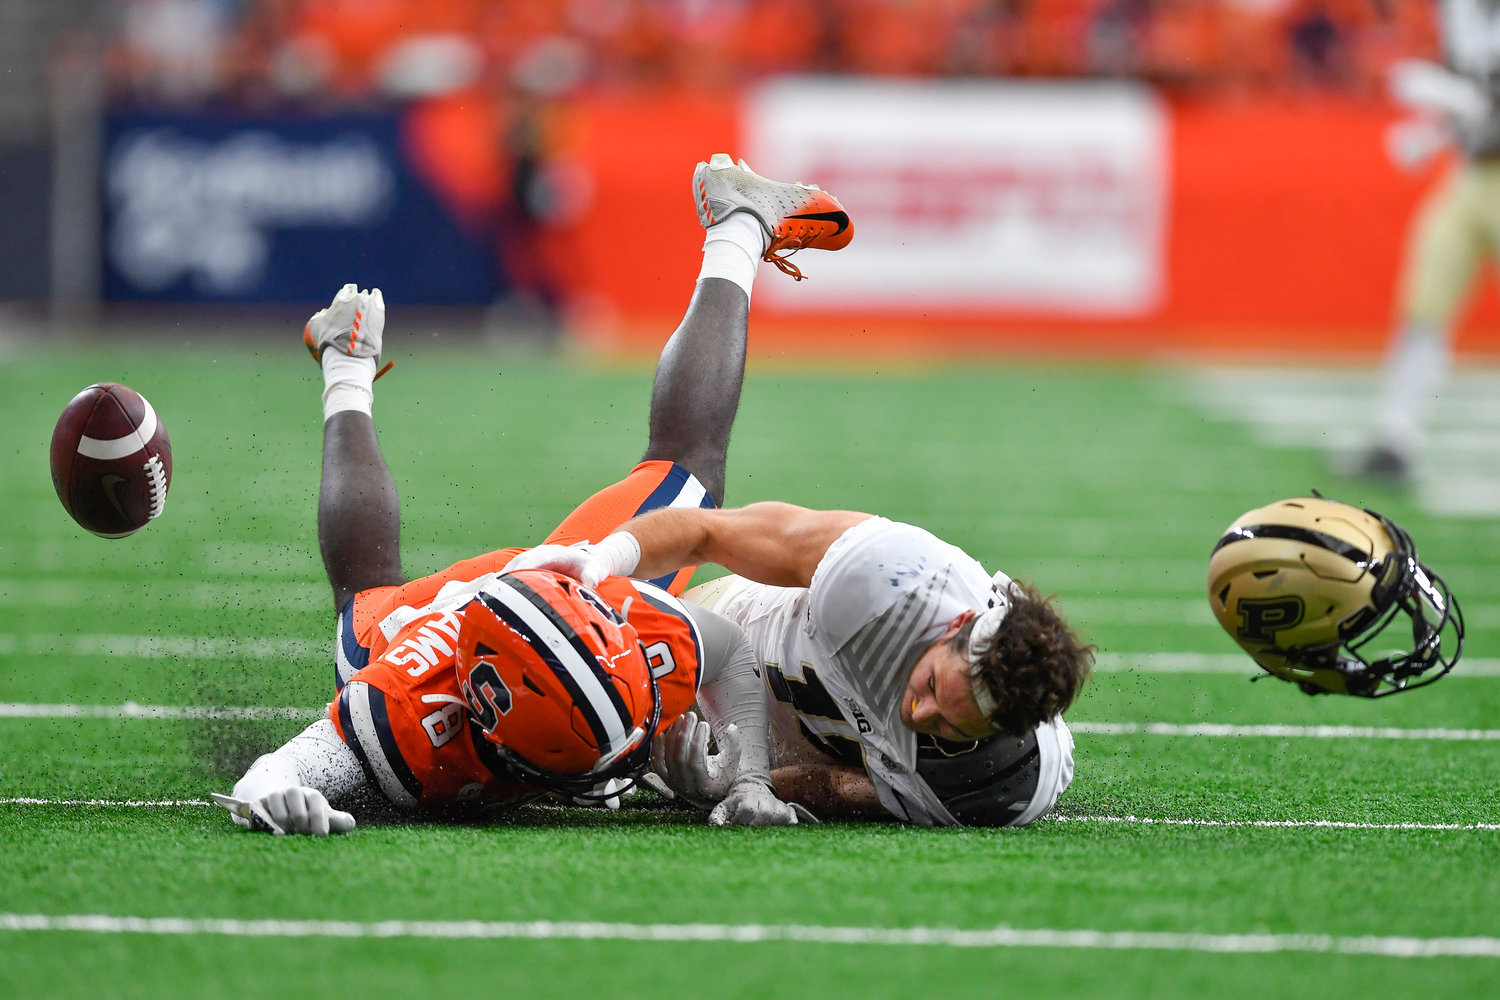 Purdue wide receiver Charlie Jones, right, loses his helmet and the ball while diving for a pass defended by Syracuse defensive back Garrett Williams during the first half of an NCAA college football game in Syracuse, N.Y., Saturday, Sept. 17, 2022.